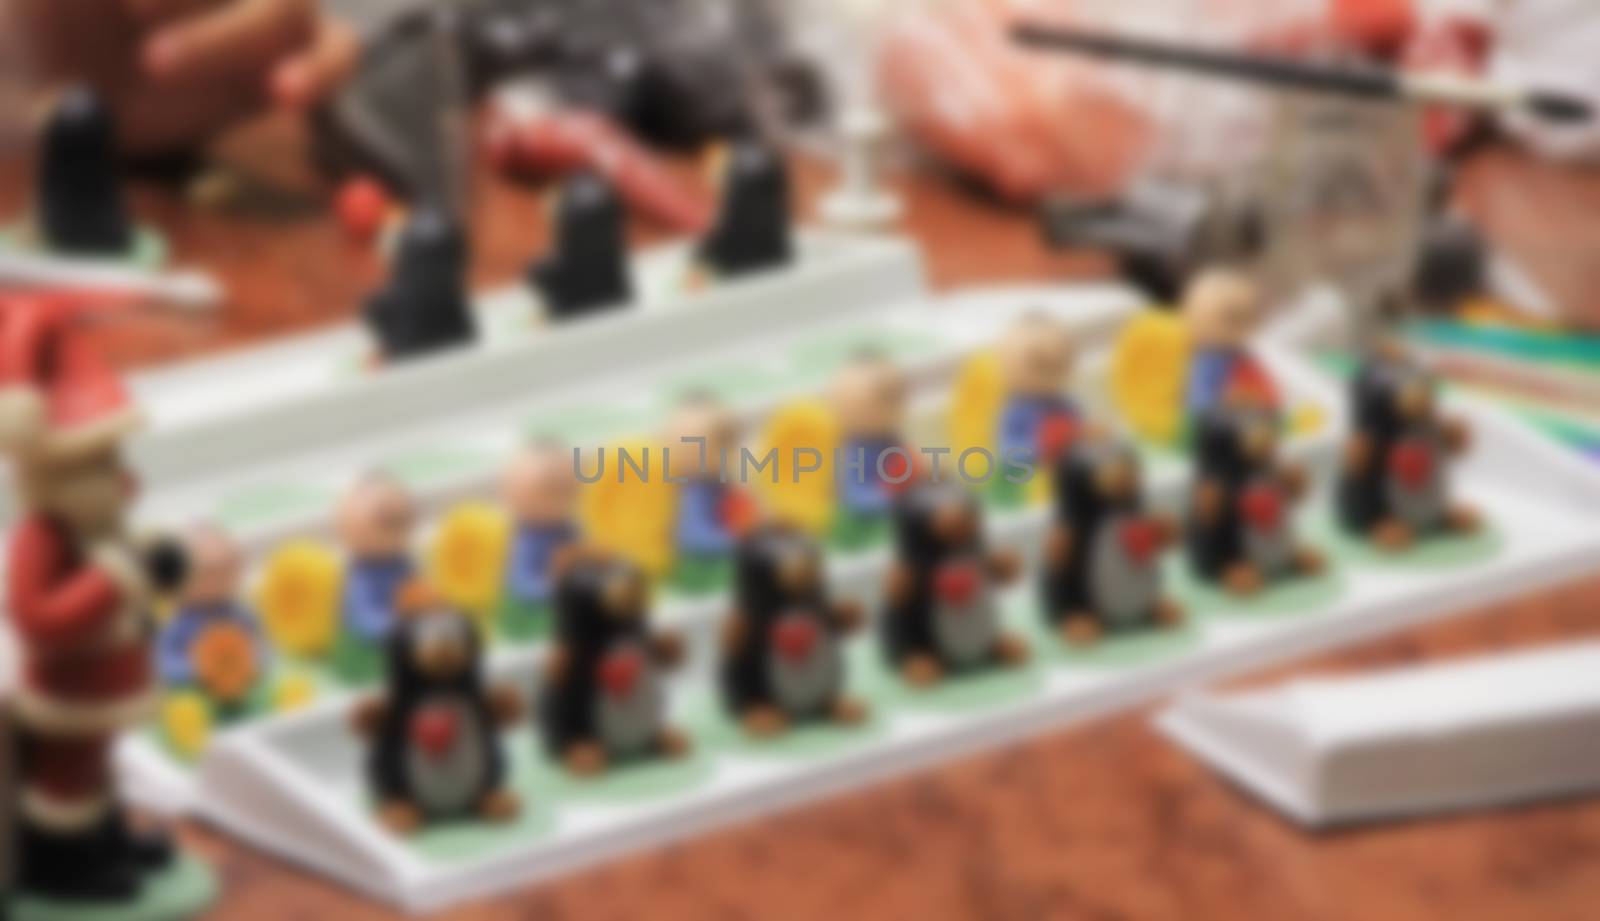 figures of marzipan modeling, preparation of sweet decorations for cakes and pies, women's hands, marzipan museum,  blurred